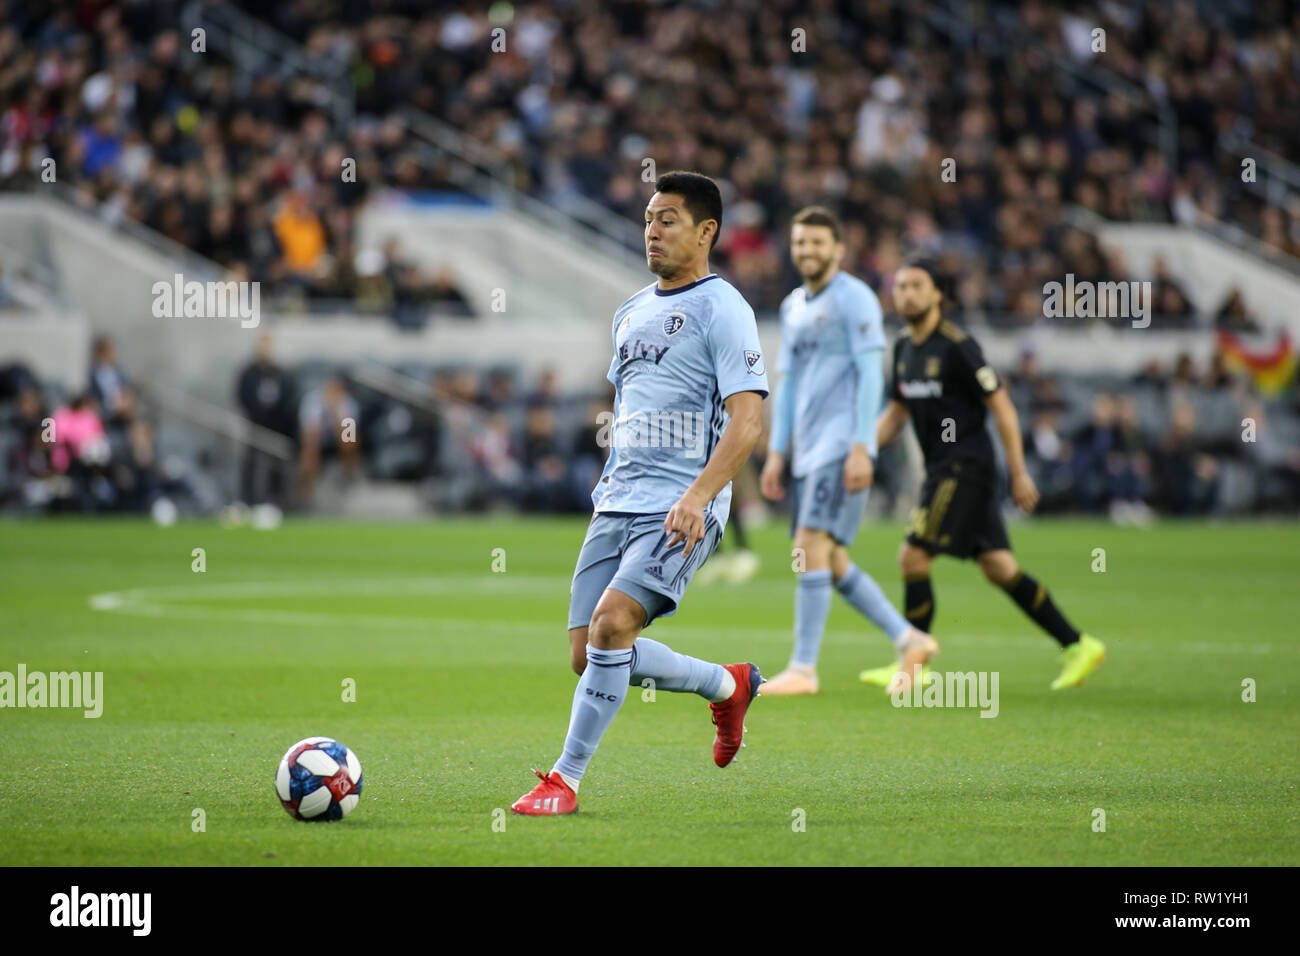 Los Angeles, CA, USA. 03rd Mar, 2019. MLS 2019: Sporting Kansas City midfielder Roger Espinoza #17 during the Los Angeles Football Club vs Sporting KC at BANC OF CALIFORNIA Stadium in Los Angeles, Ca on March 03, 2019. Photo by Jevone Moore Credit: csm/Alamy Live News Stock Photo